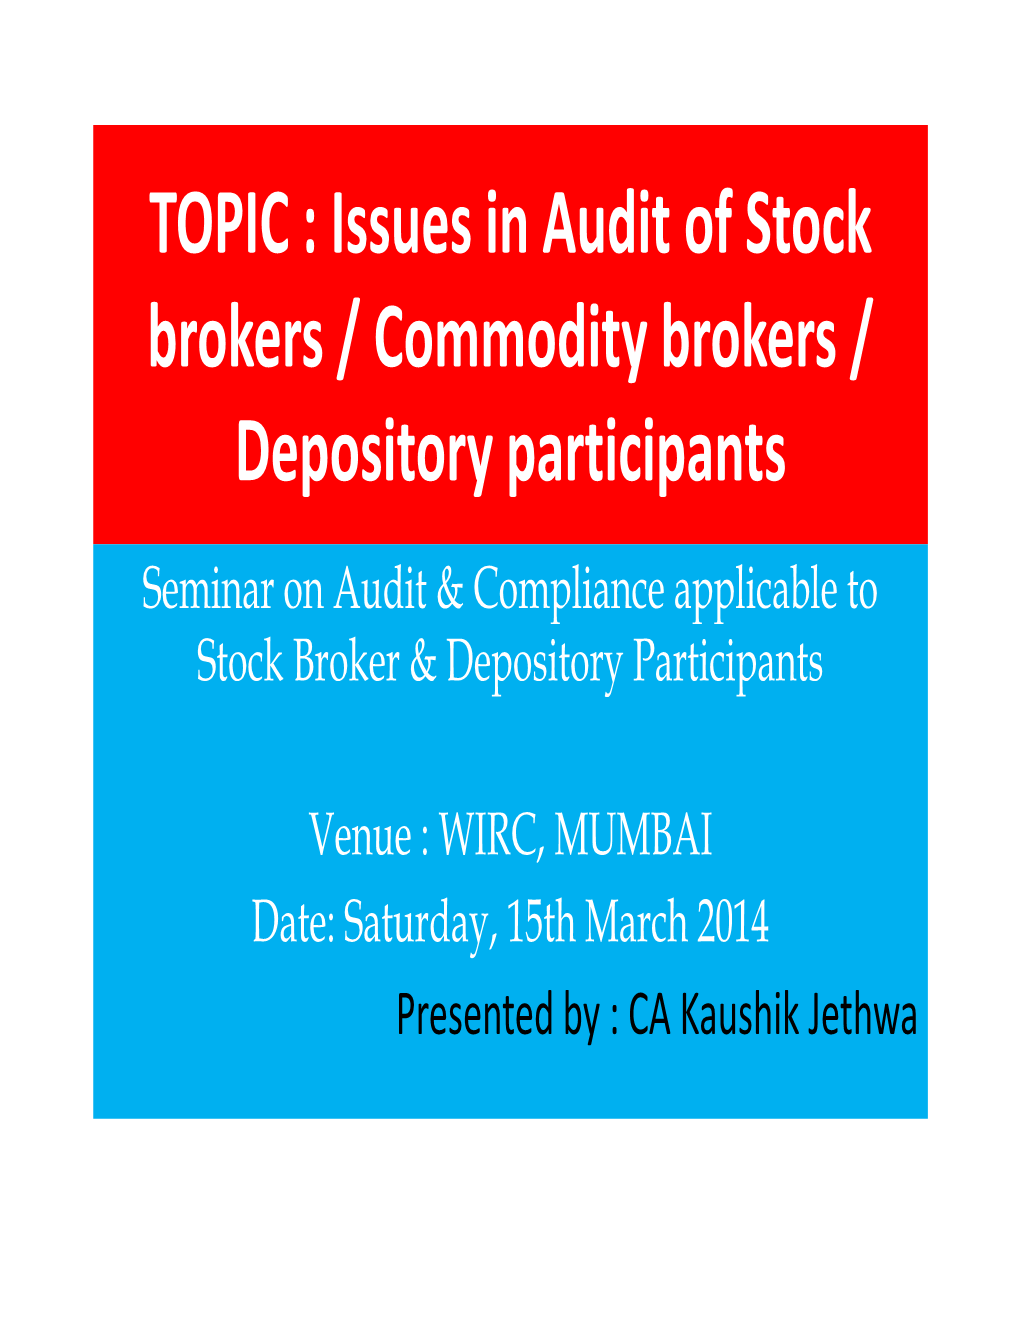 Issues in Audit of Stock Brokers / Commodity Brokers / Depository Participants